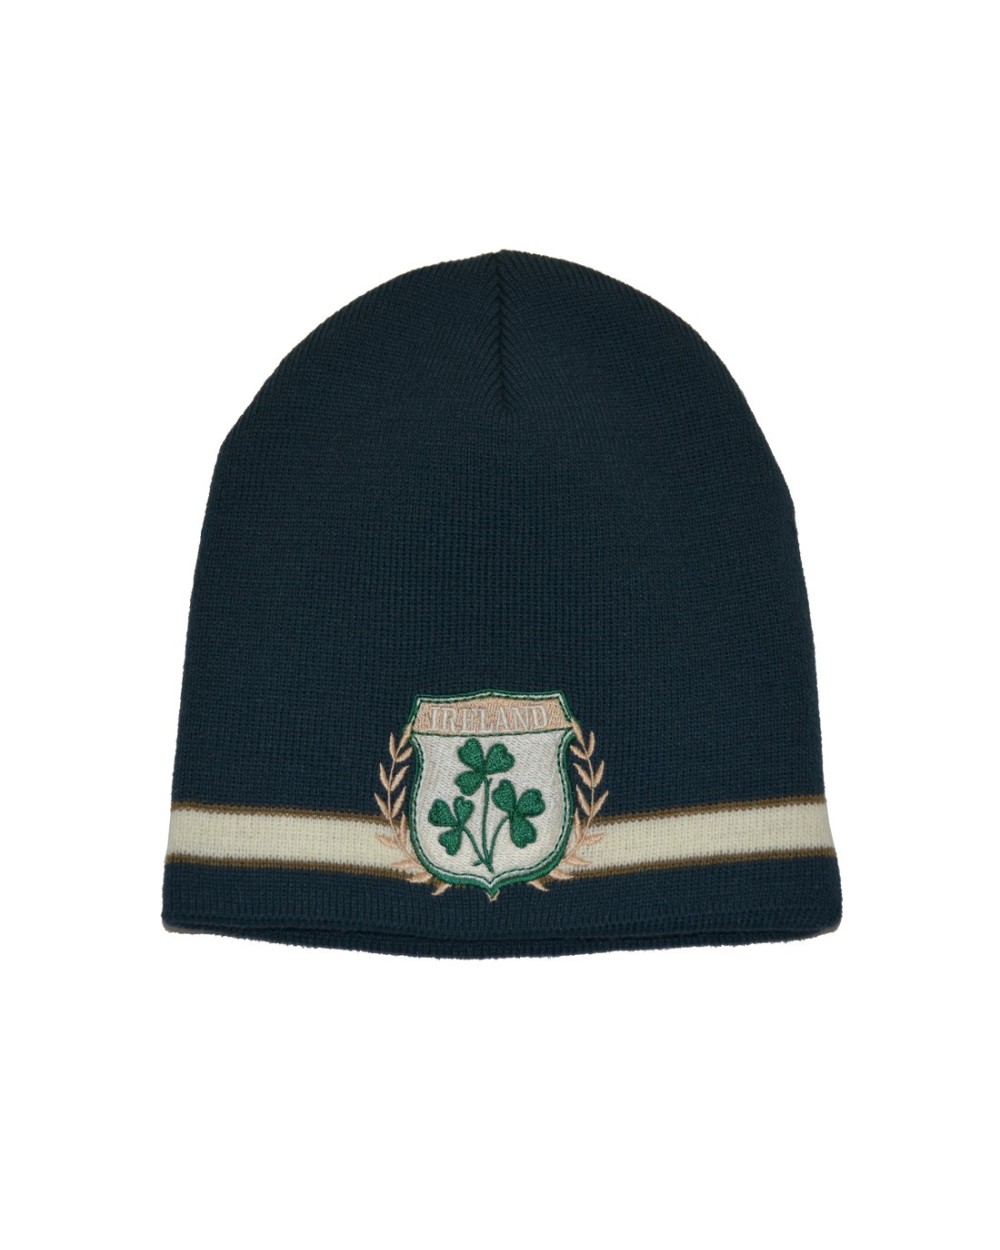 Lansdowne Sports Official Collection Bottle Green Crest Knit Hat